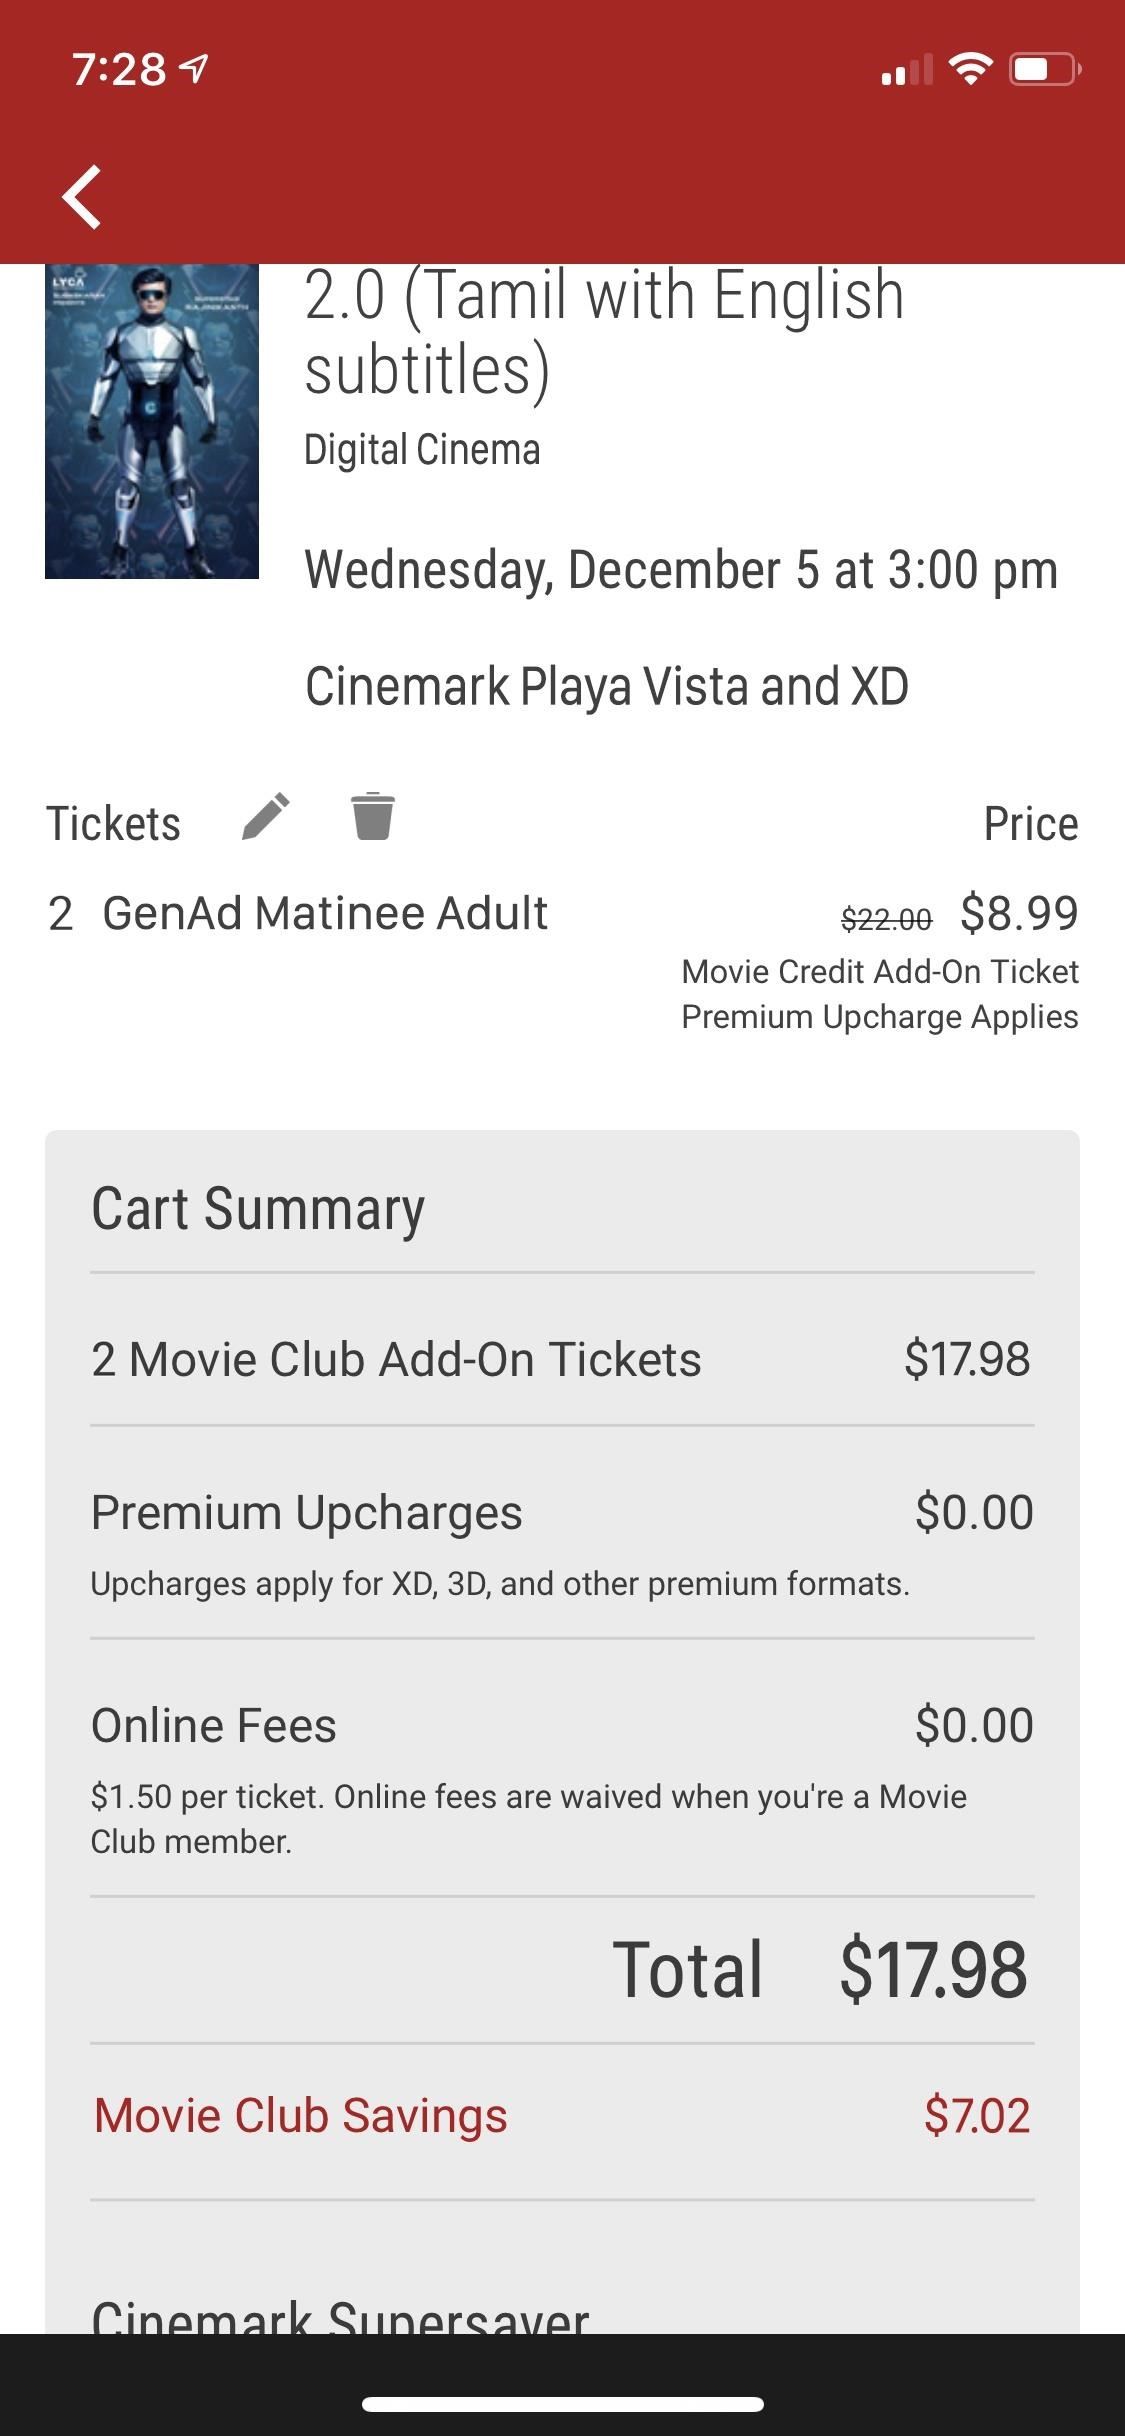 Cinemark Movie Club is a great membership for casual moviegoers and popcorn junkies.